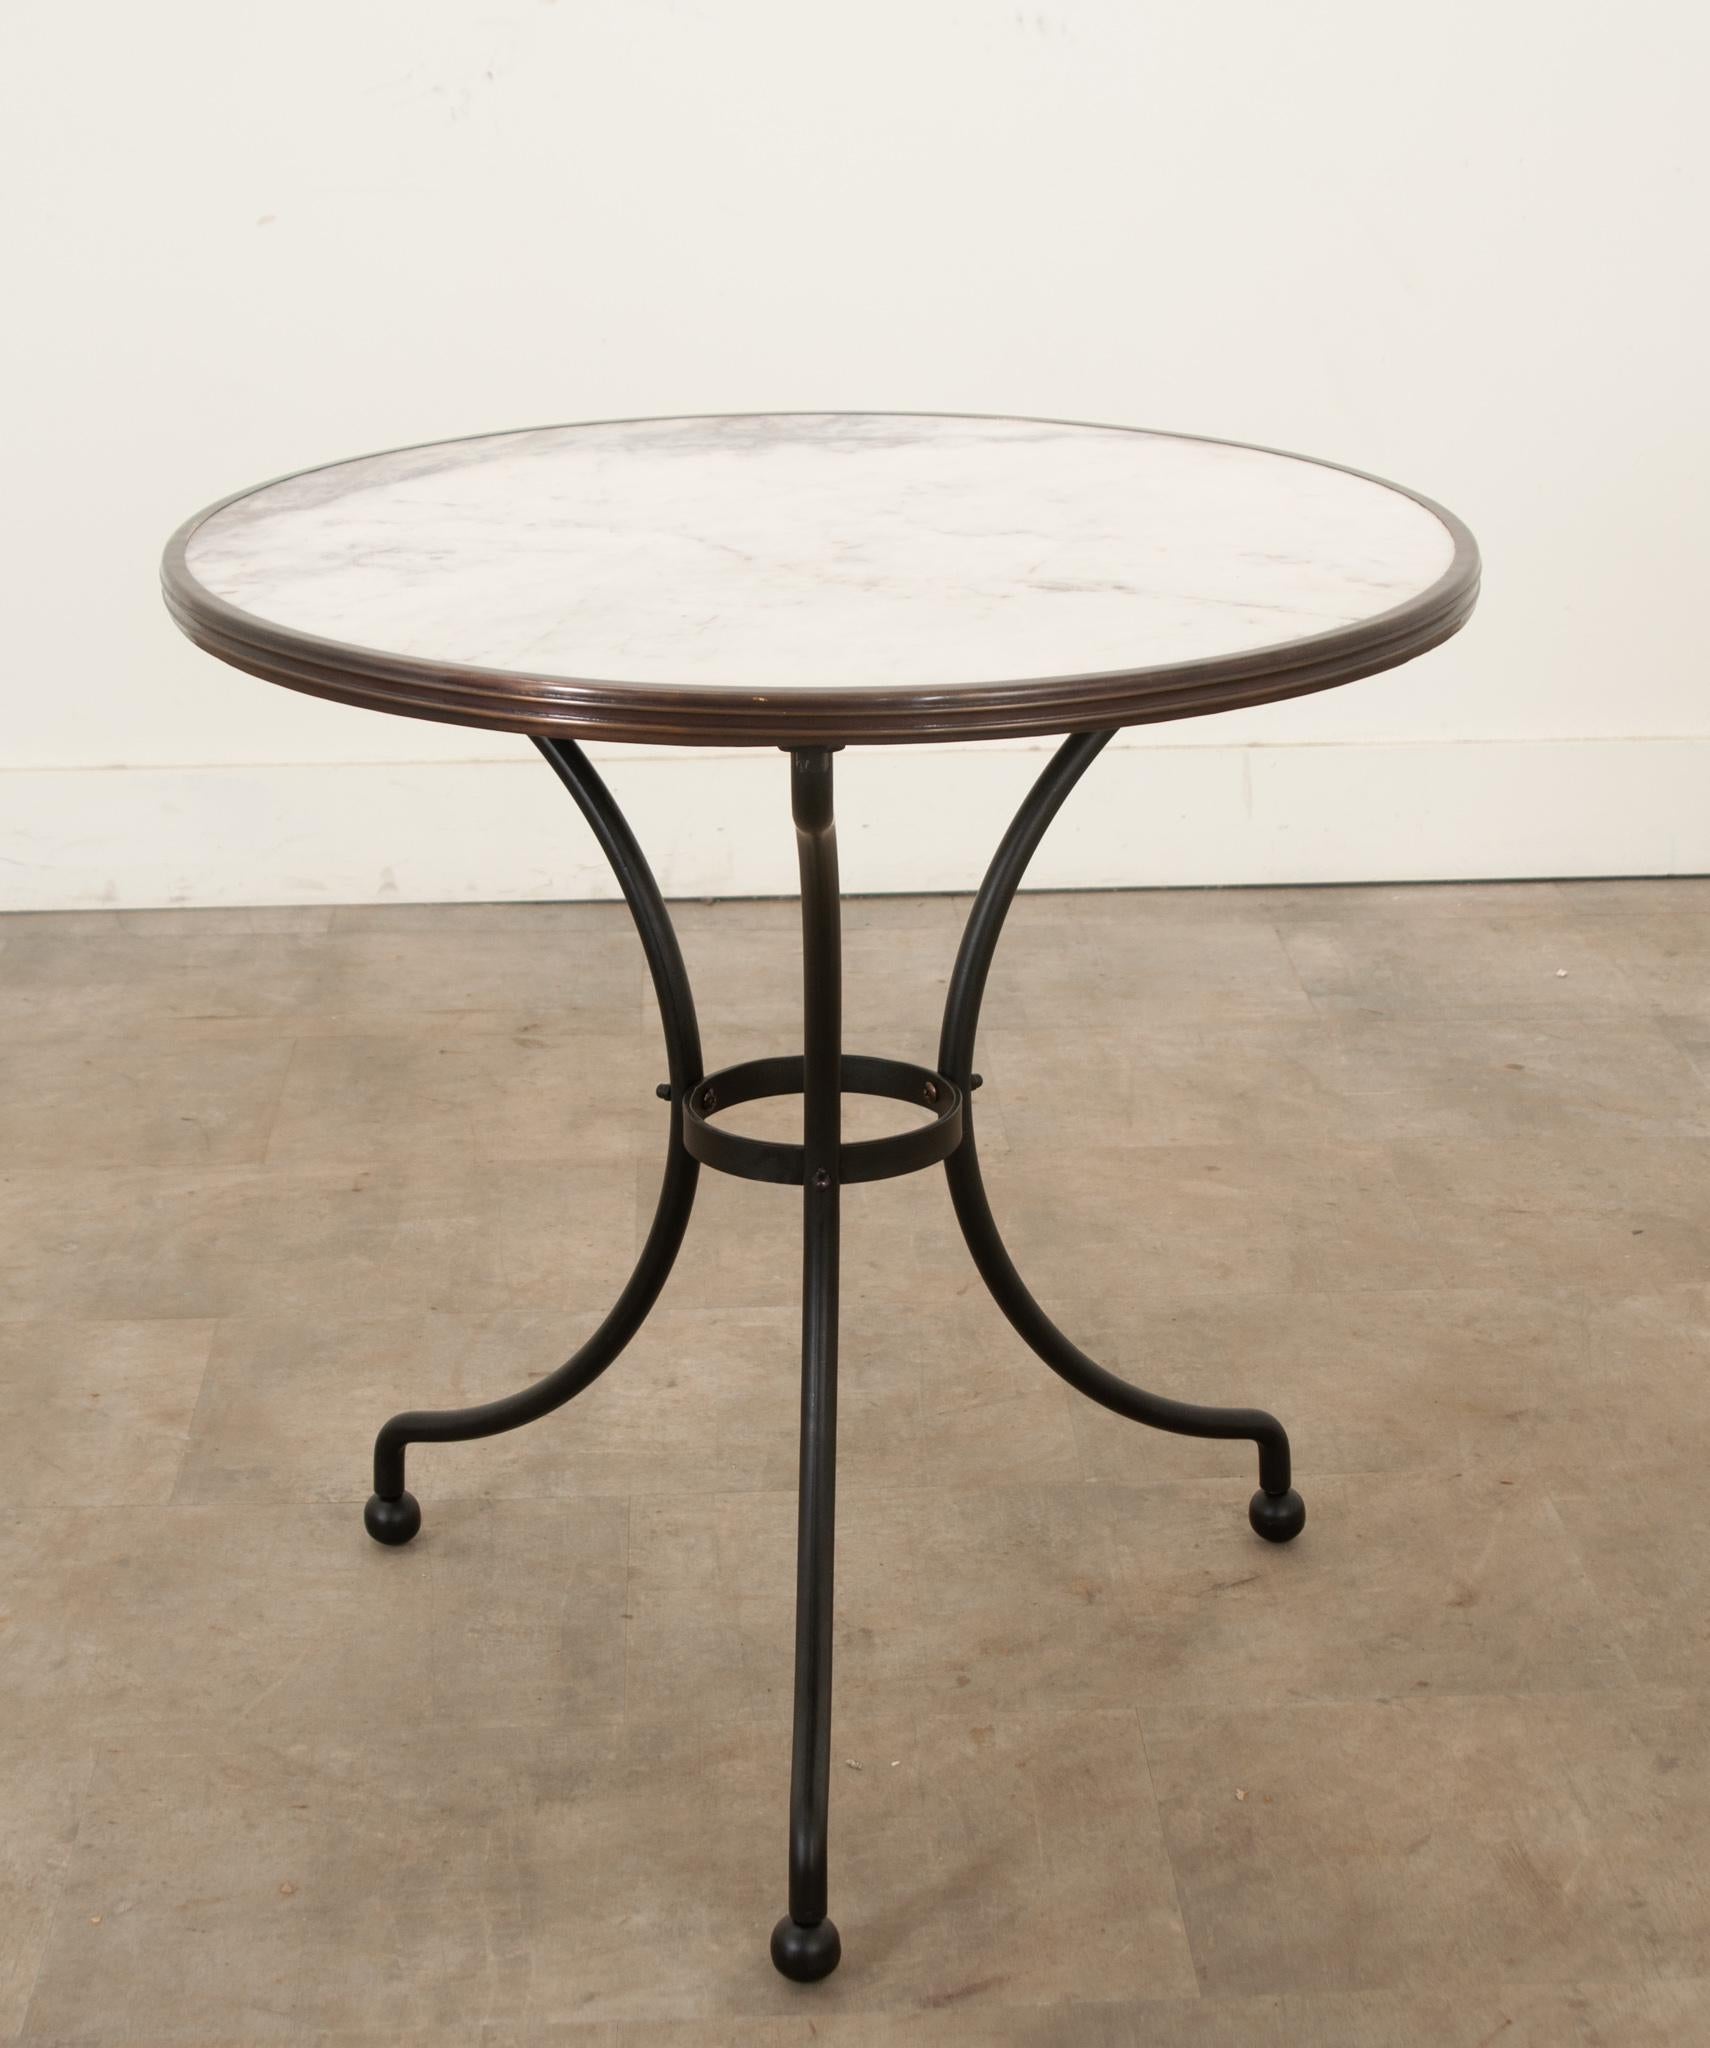 Cast Reproduction French Cafe Table